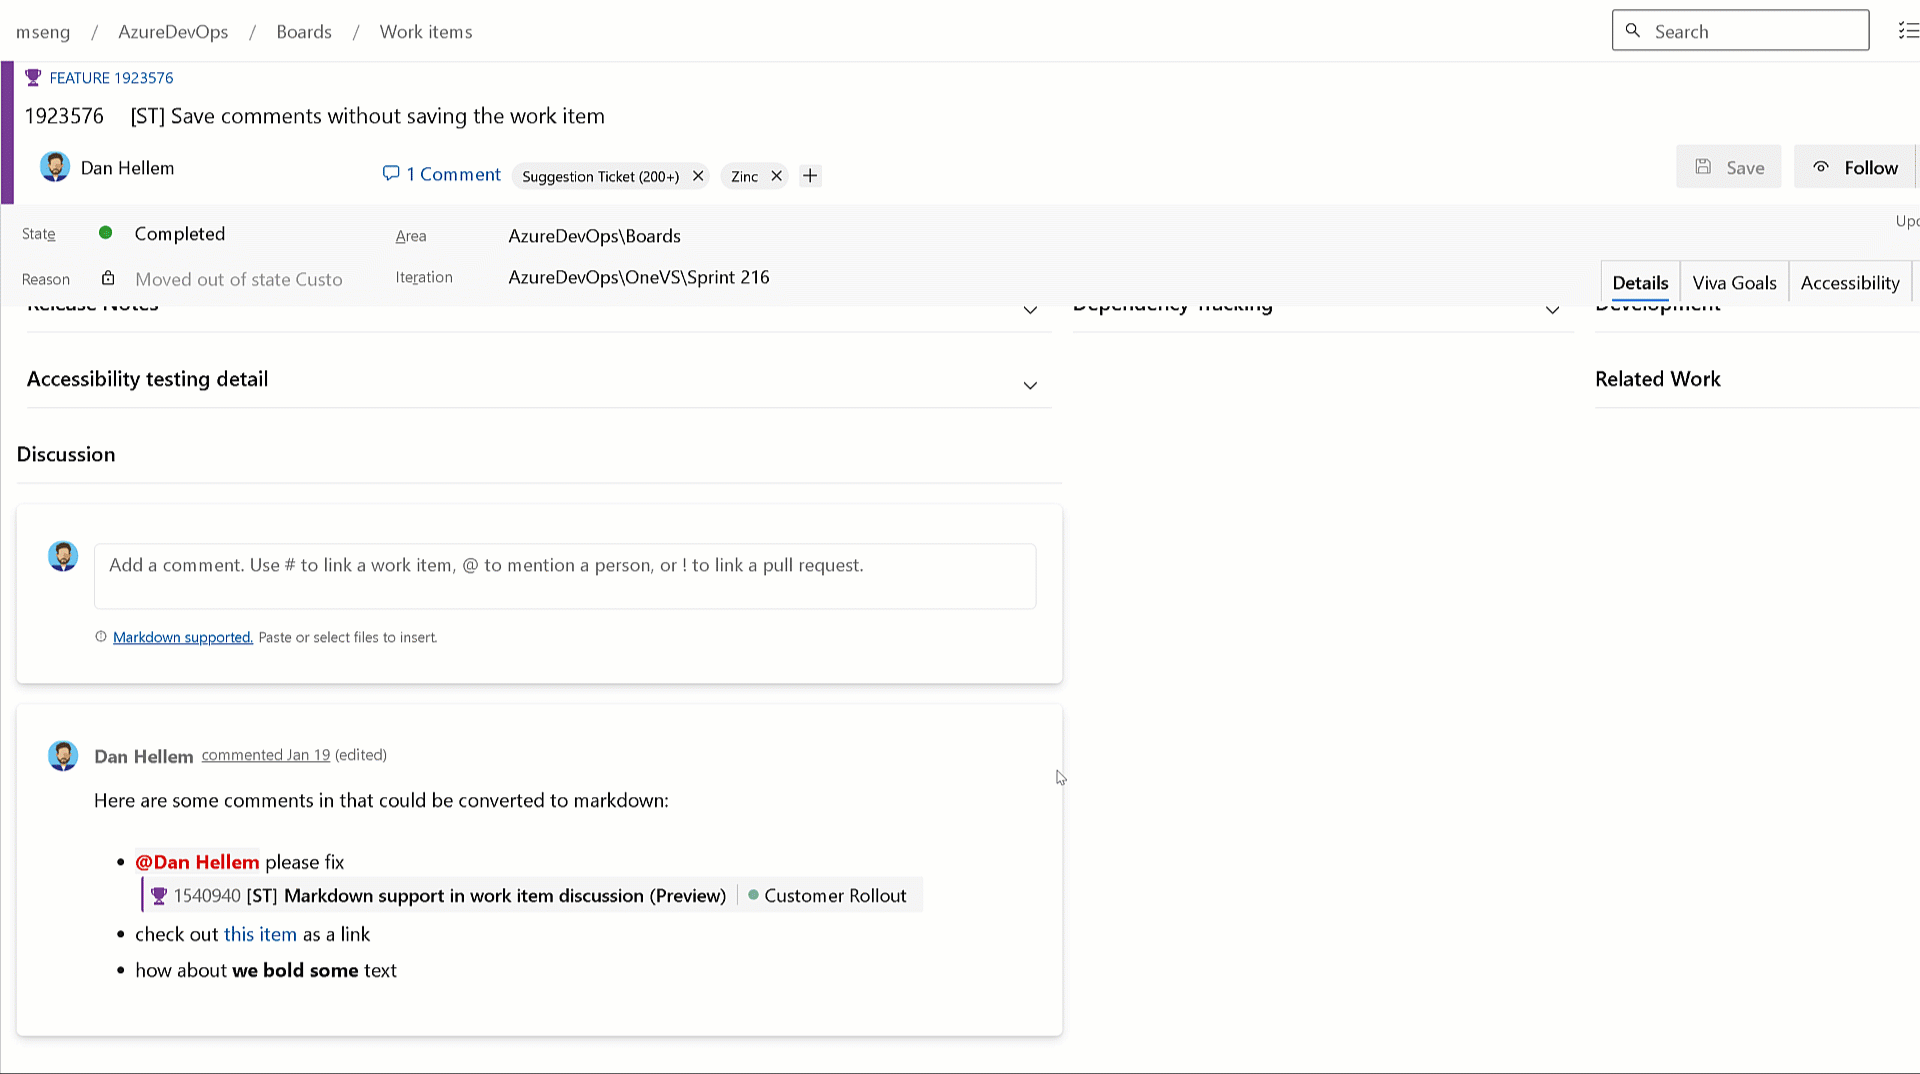 Gif to demo markdown support for comments.